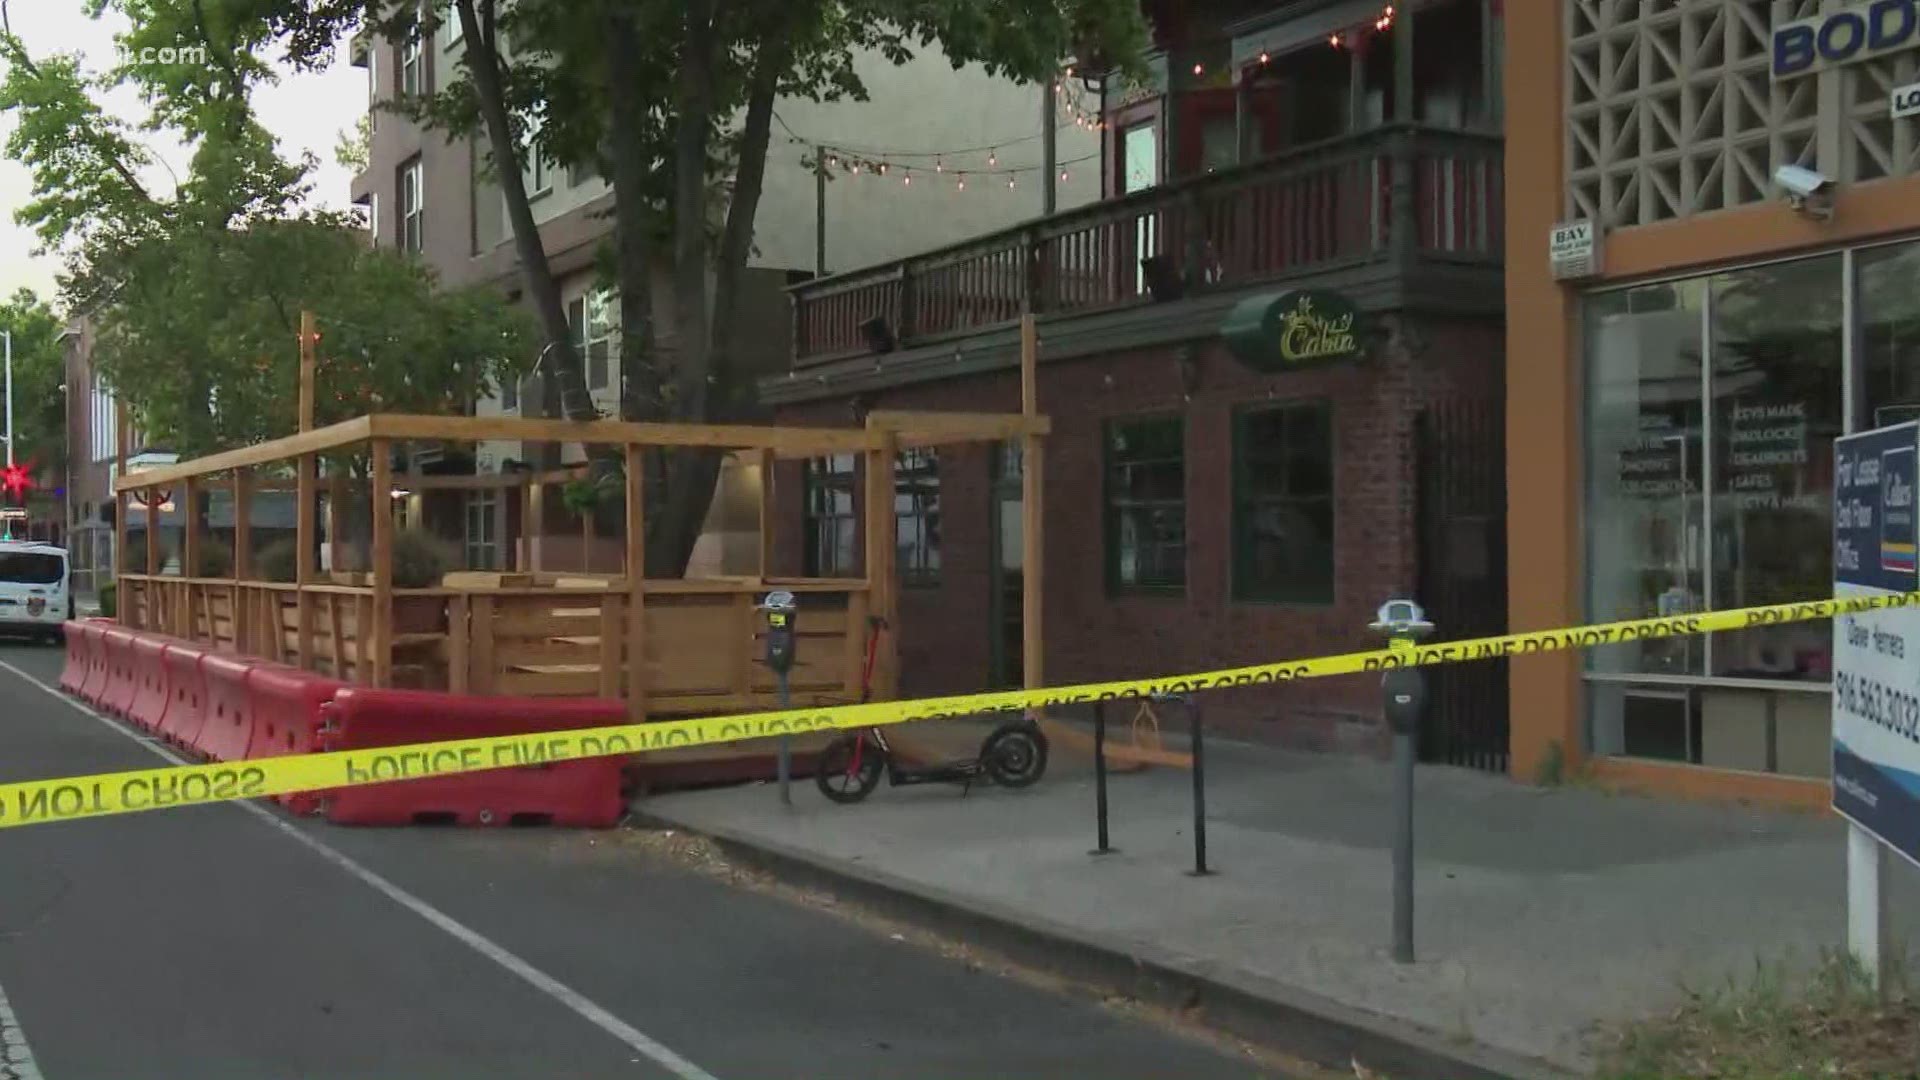 The shooting happened near the Cabin bar on 21st and L streets and left one person dead and another injured.